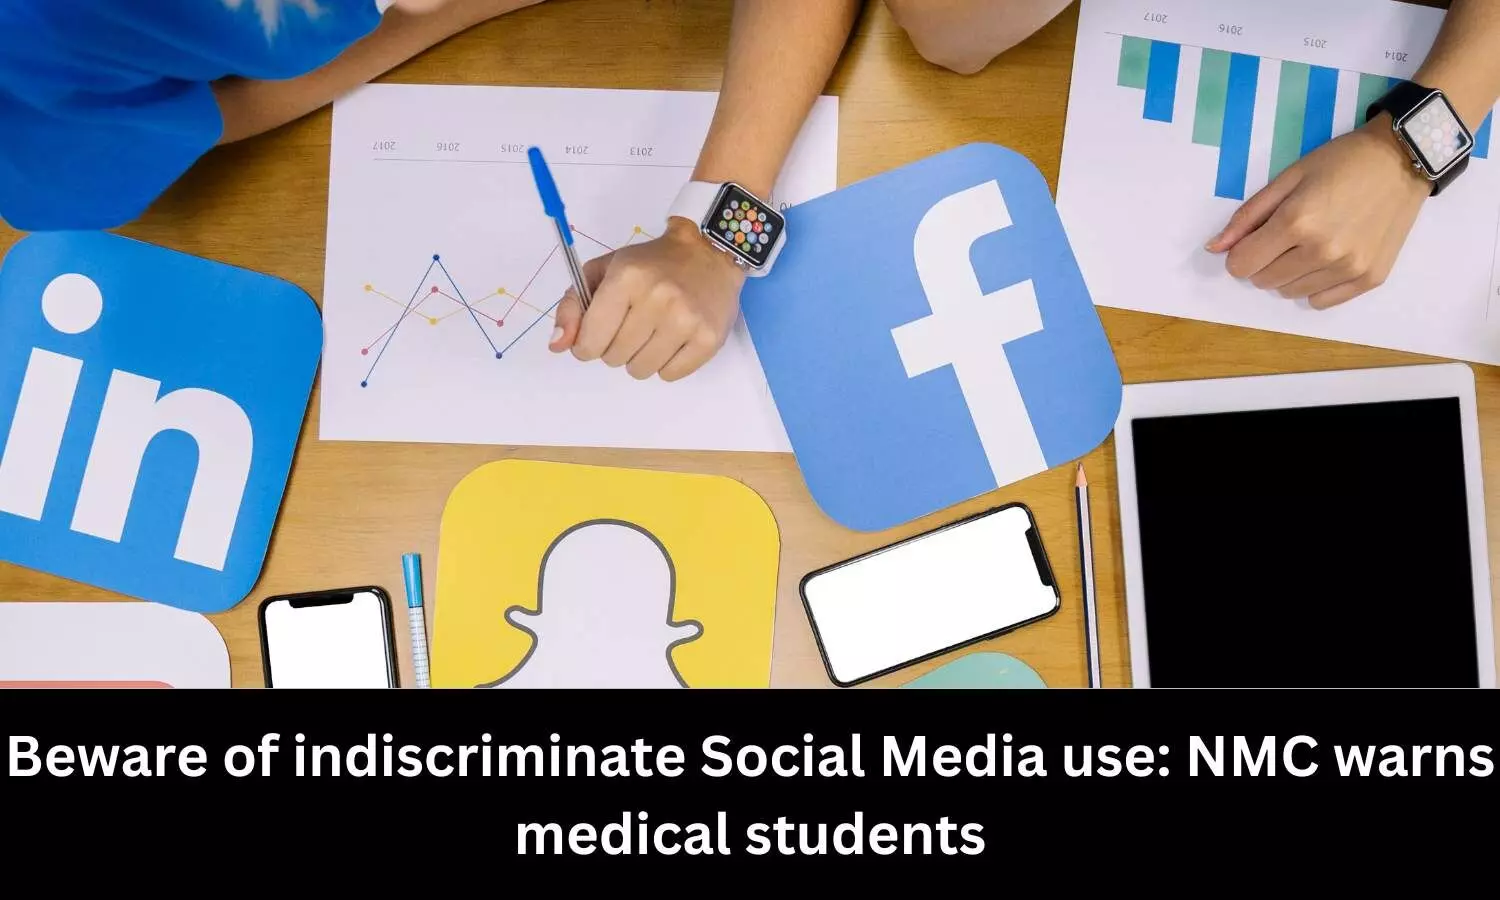 Do not indiscriminately post patient-related information on social media: NMC asks medical students